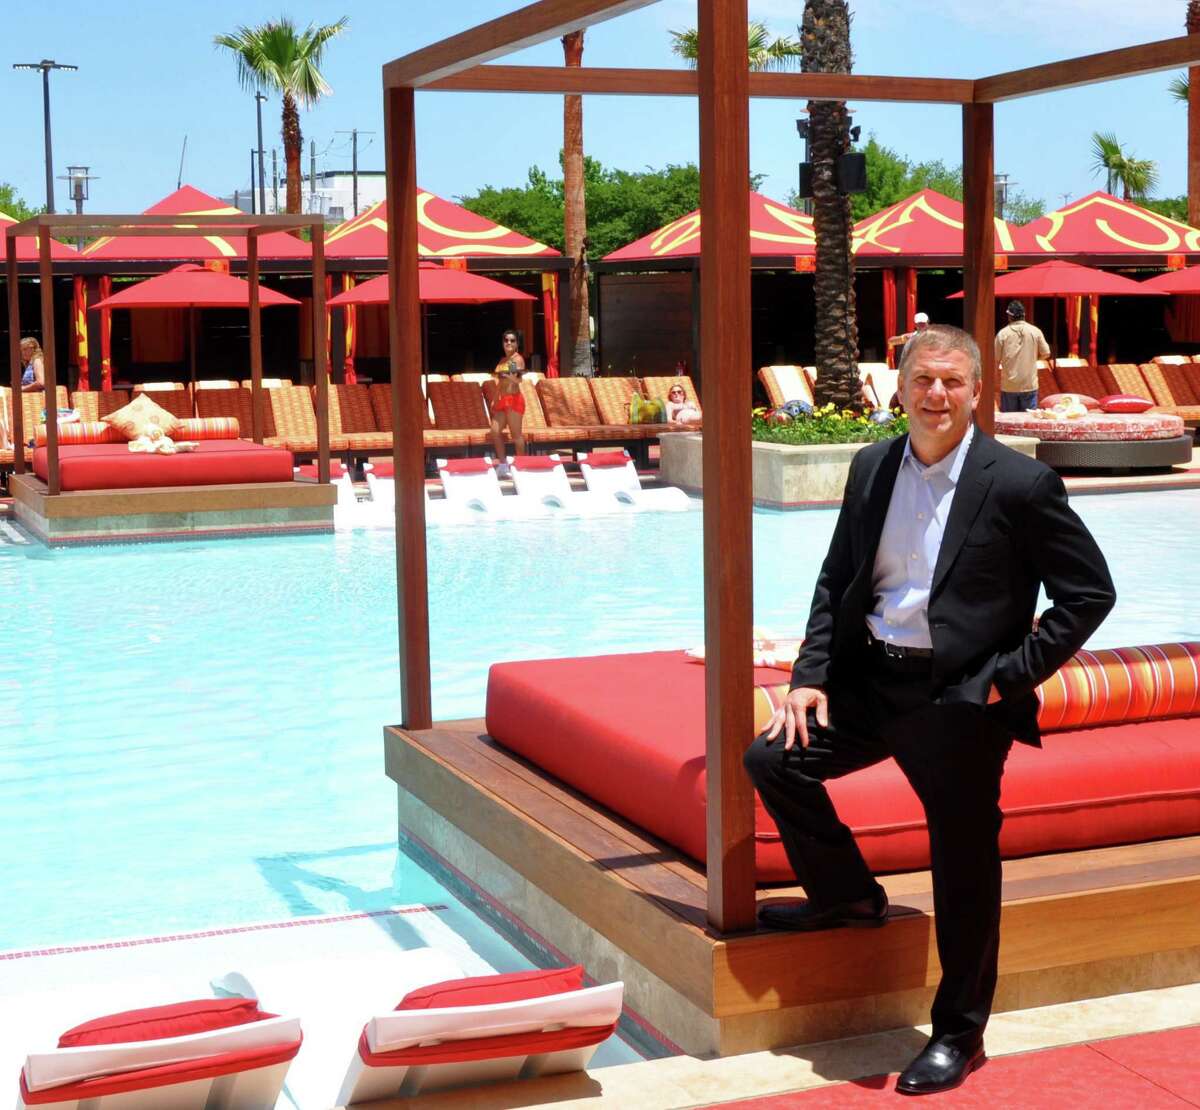 Billionaire Tilman Fertitta's Golden Nugget casino in Biloxi, Mississippi features an opulent pool area with a sunken bar, sunbathing couches the size of beds and a blackjack station on the patio.